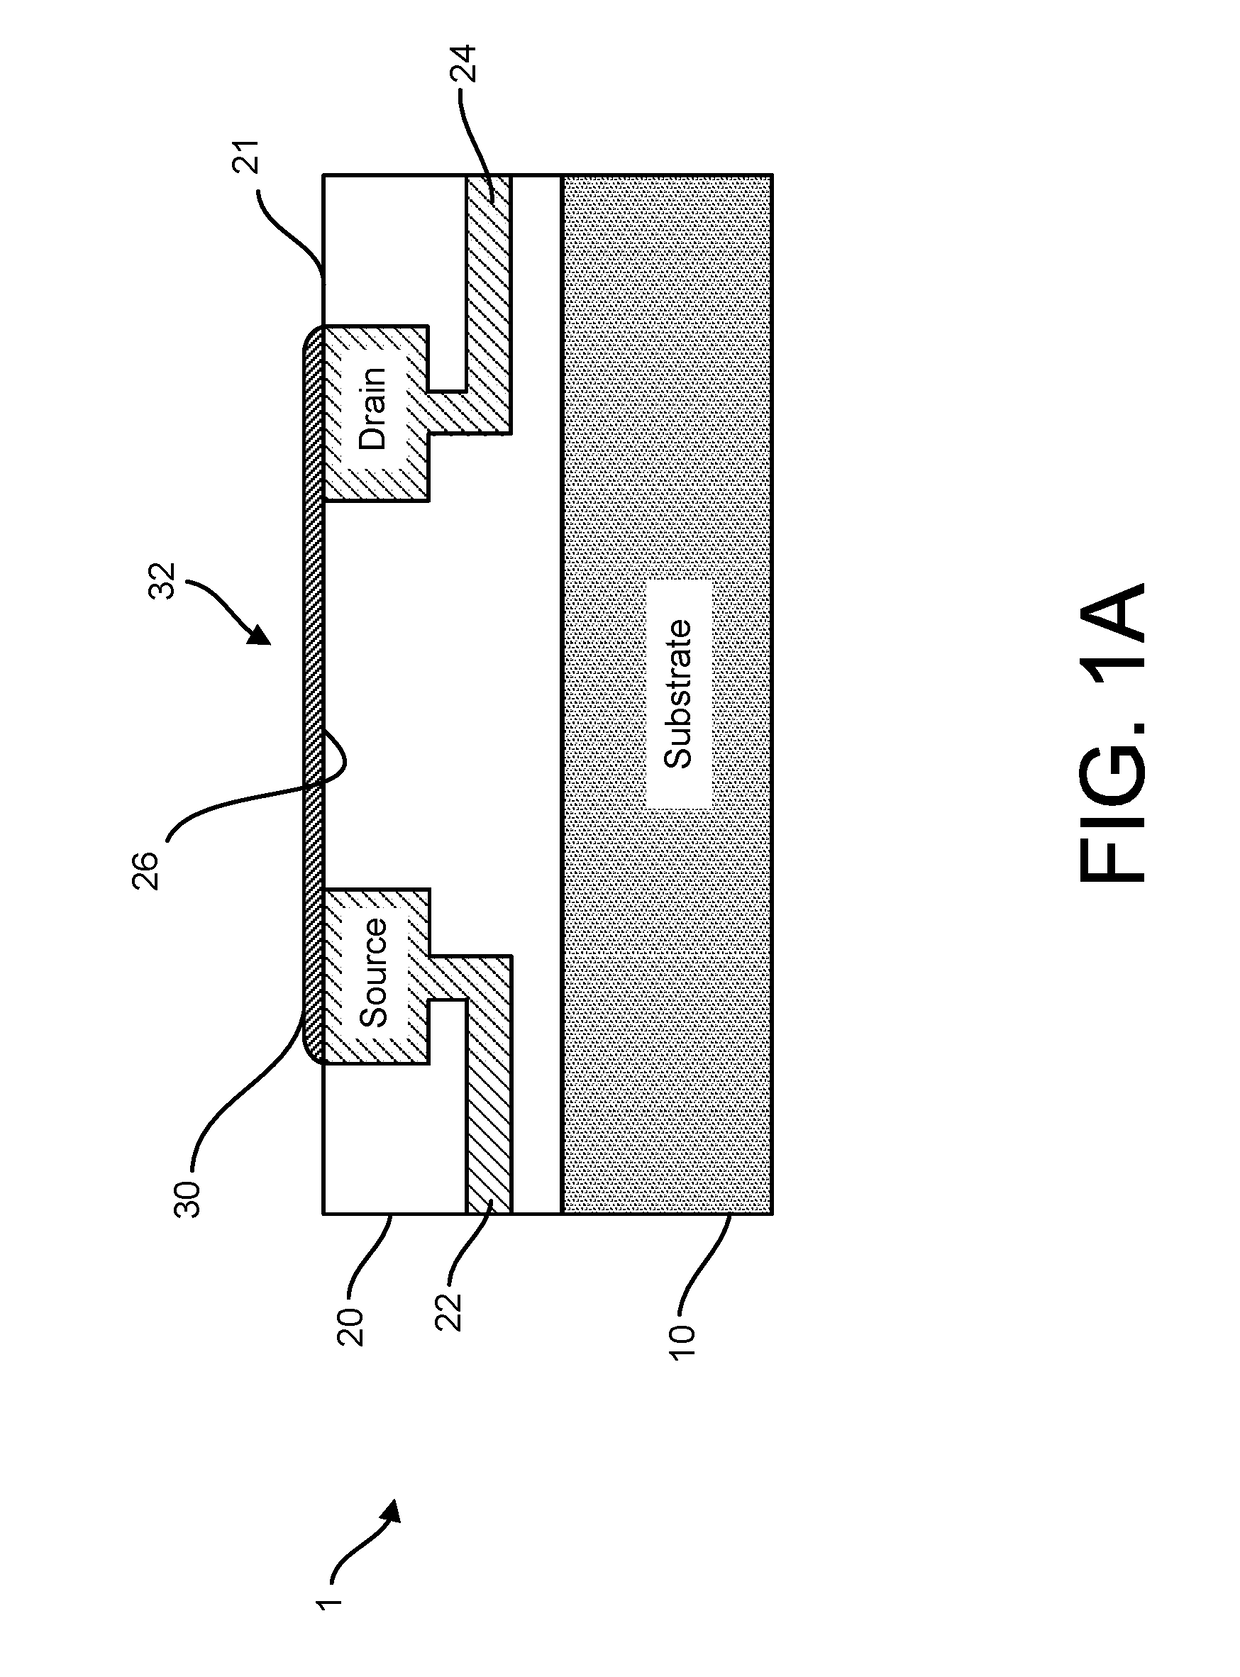 Graphene FET devices, systems, and methods of using the same for sequencing nucleic acids